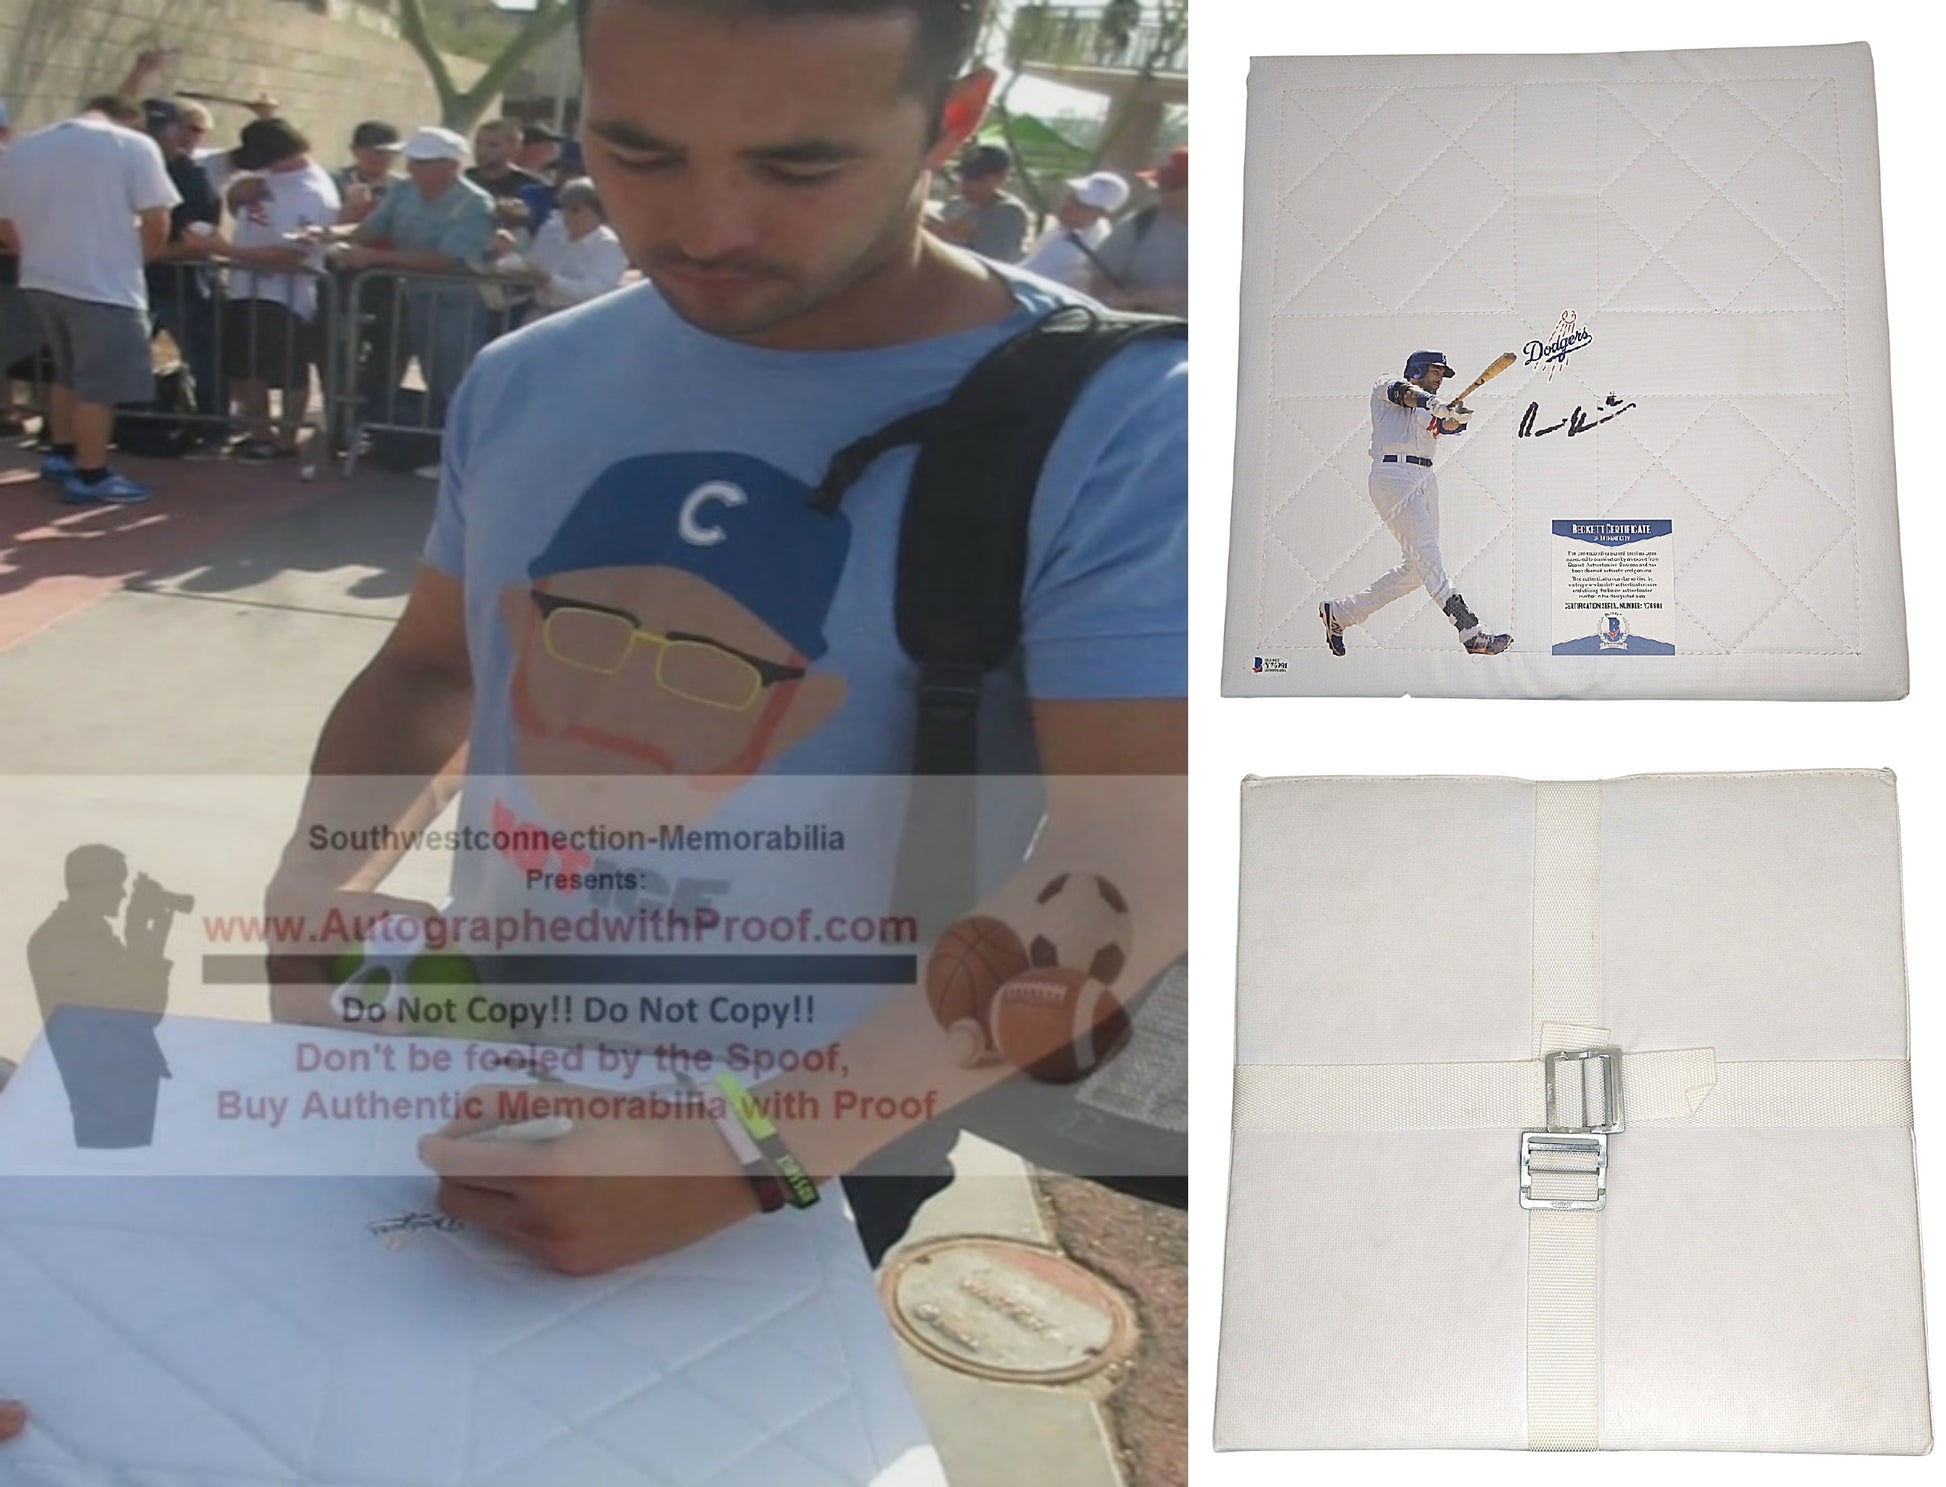 Baseball Home Plates- Autographed- Andre Ethier Signed Los Angeles Dodgers Photo Full Size Base Exact Proof - Beckett BAS Authentication - Collage 1